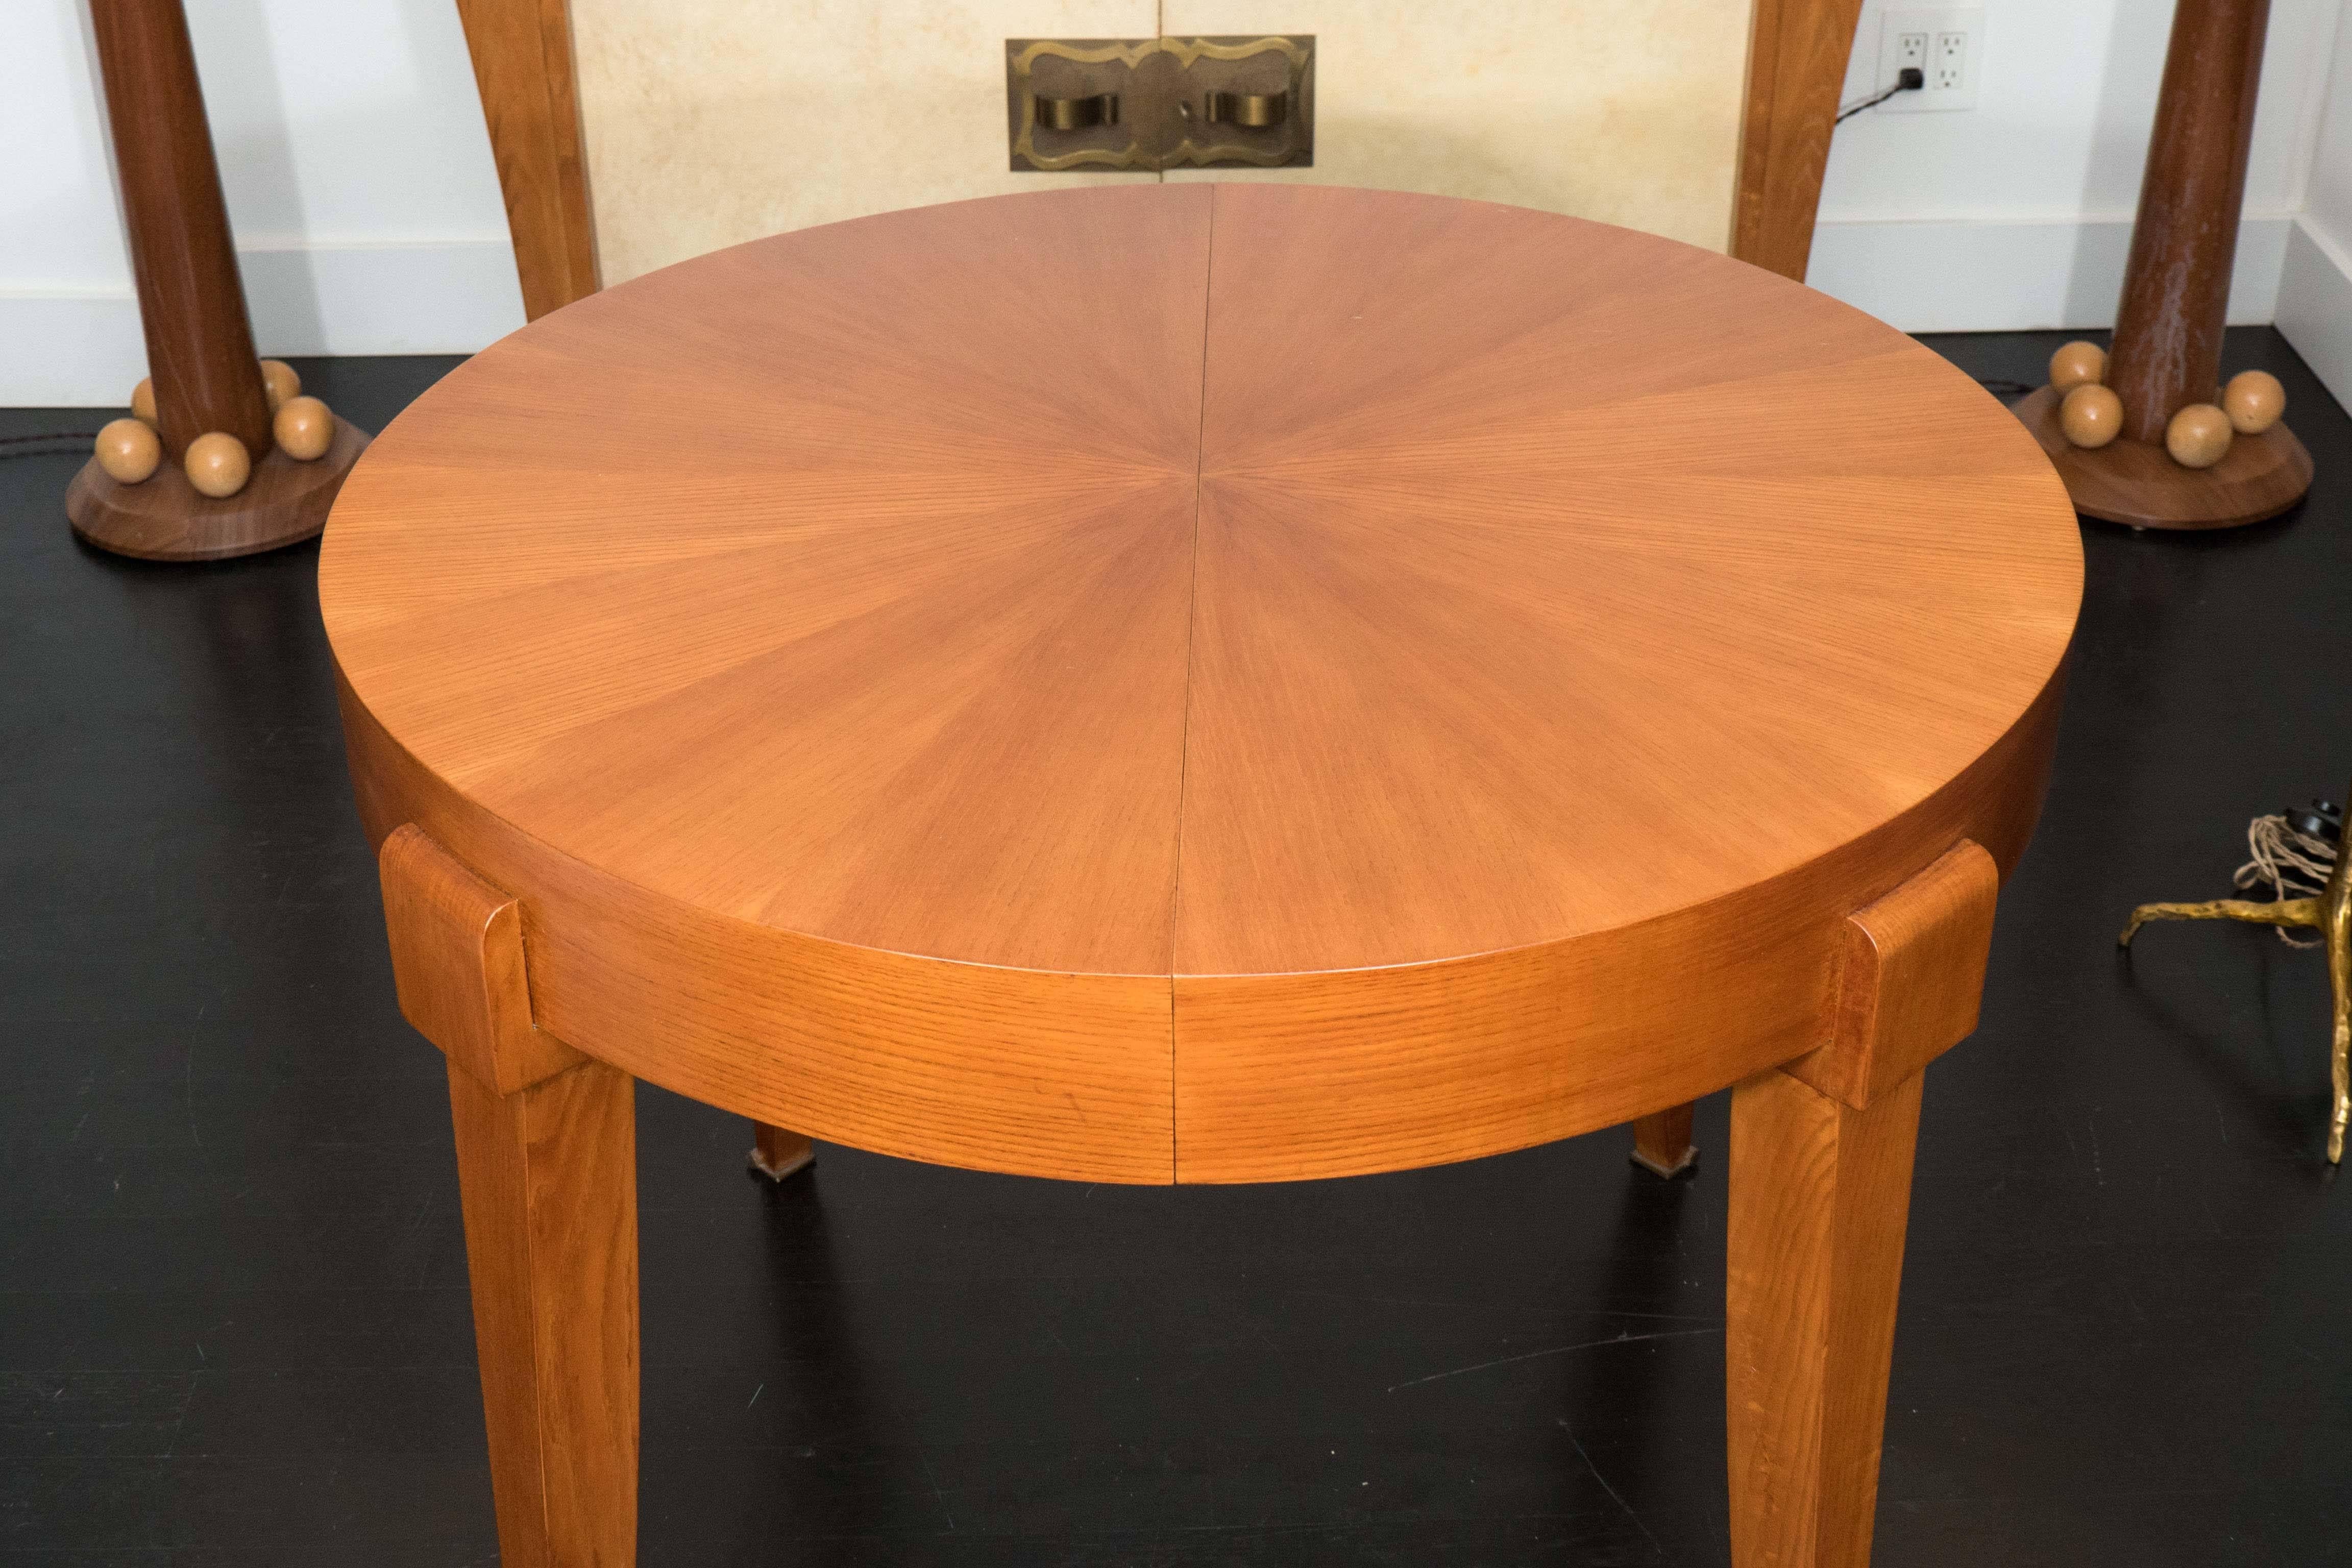 Oak center table with extendible marquetry top. Extensions not available, custom-made to order. Beautifully detailed legs with brass accents.